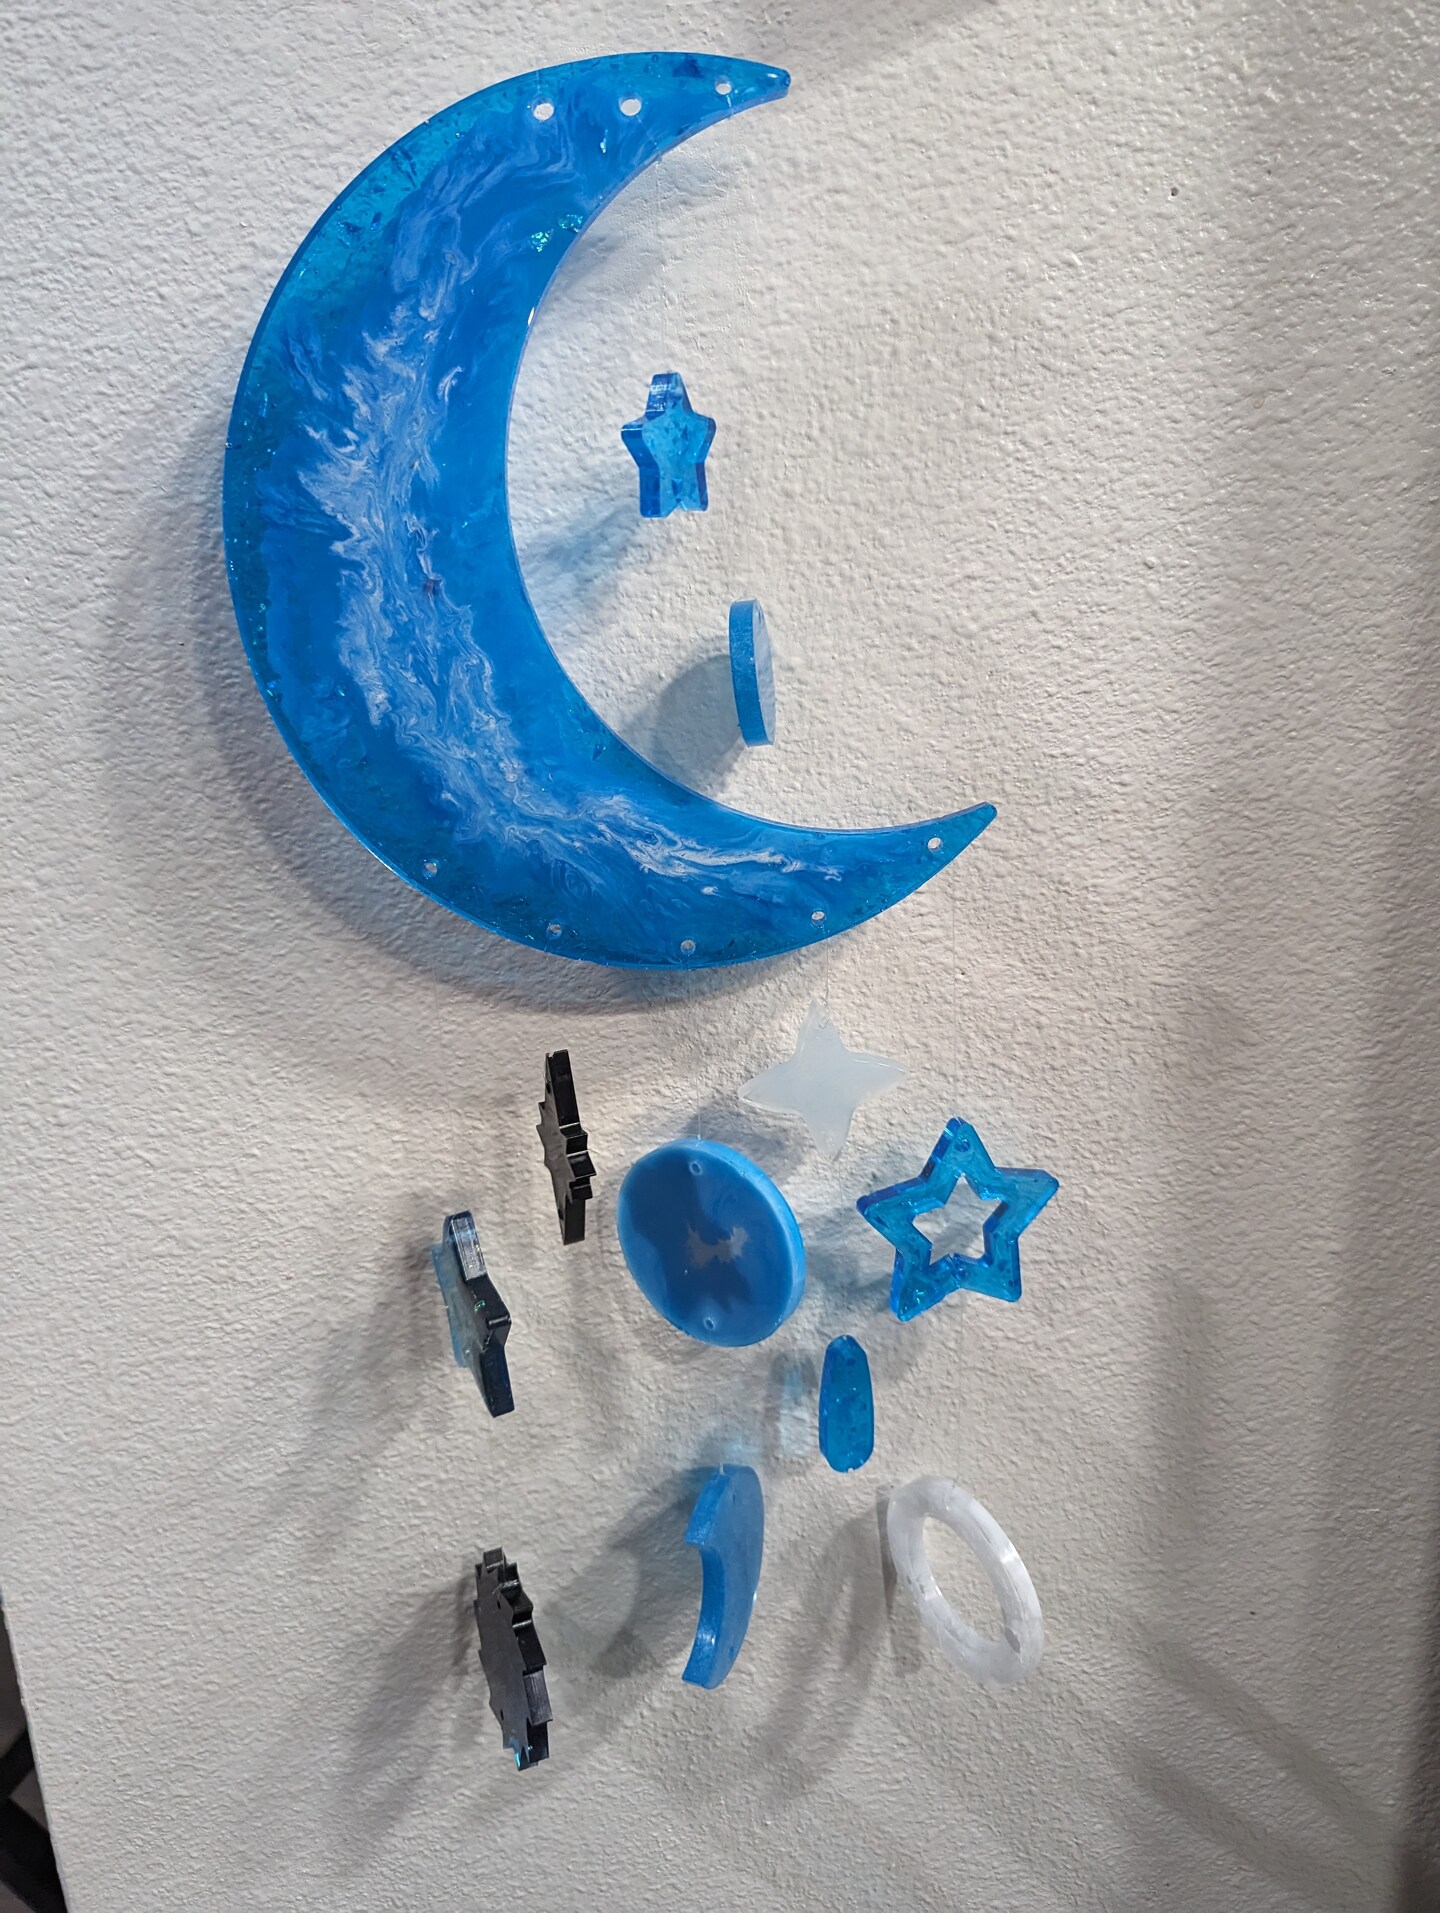 Paper Plate Moon & Star